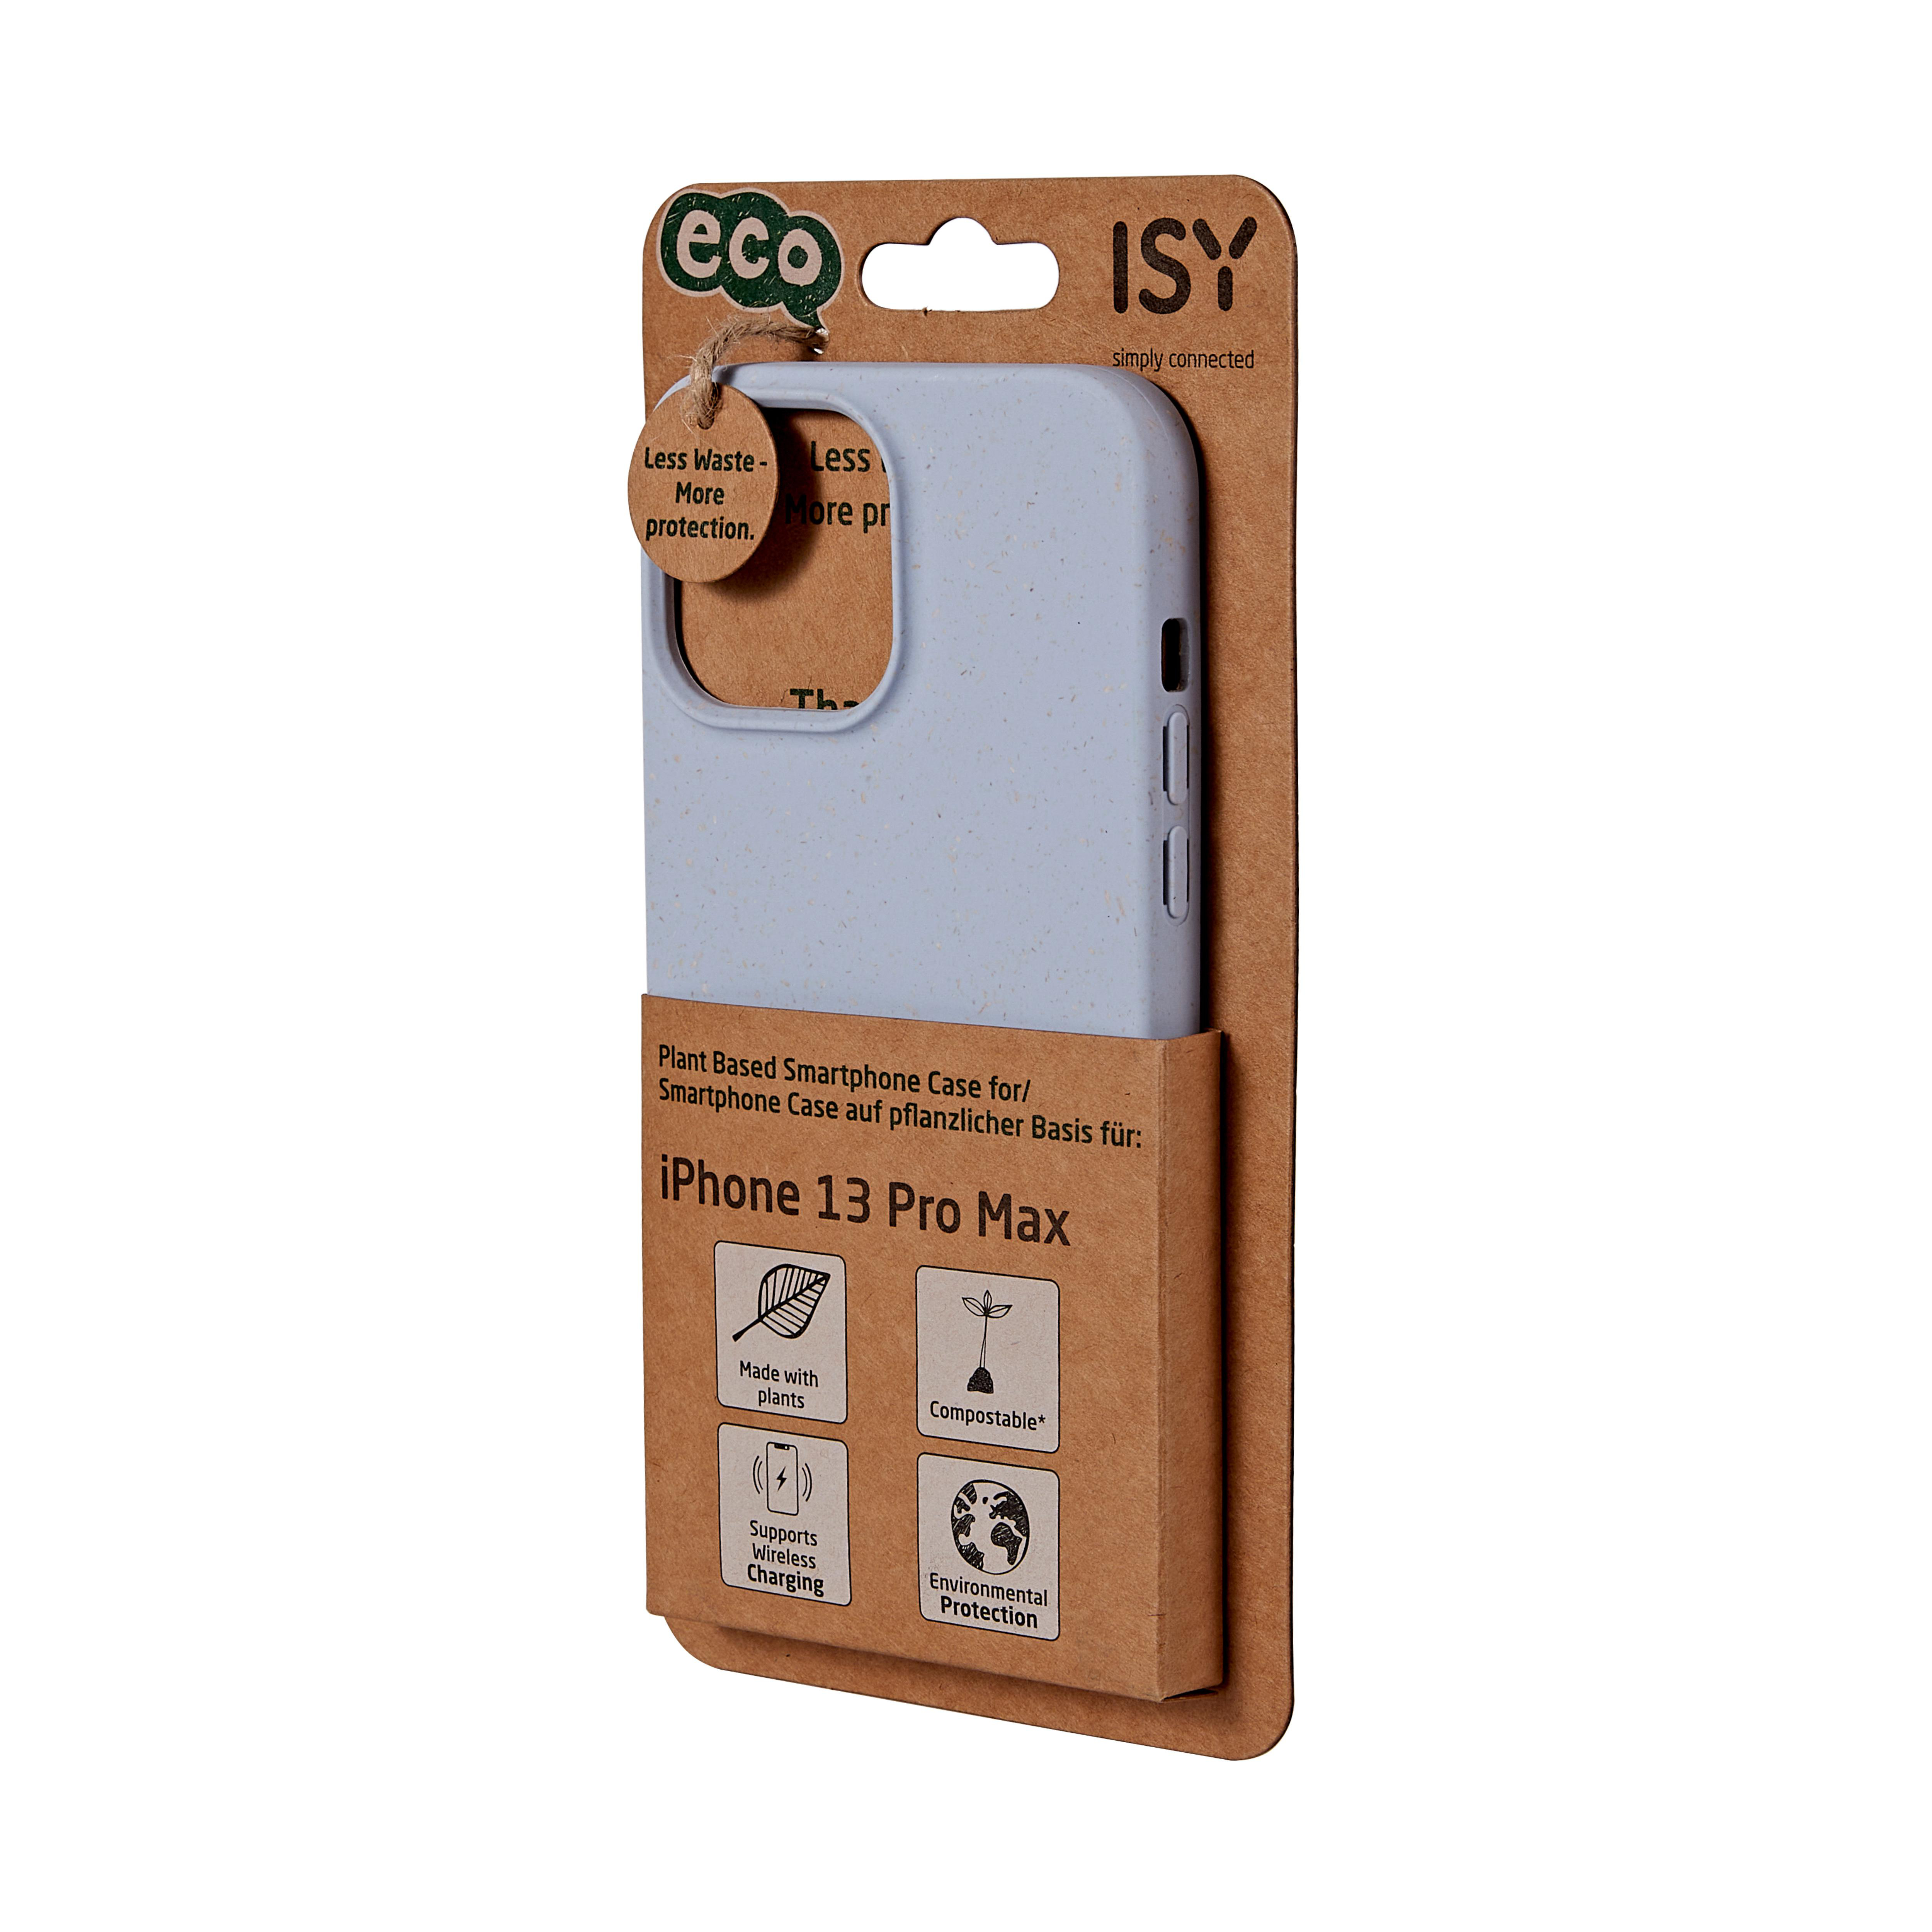 ISC-6005, BioCase, iPhone Backcover, Apple, Pro ISY 13 Blau Max,